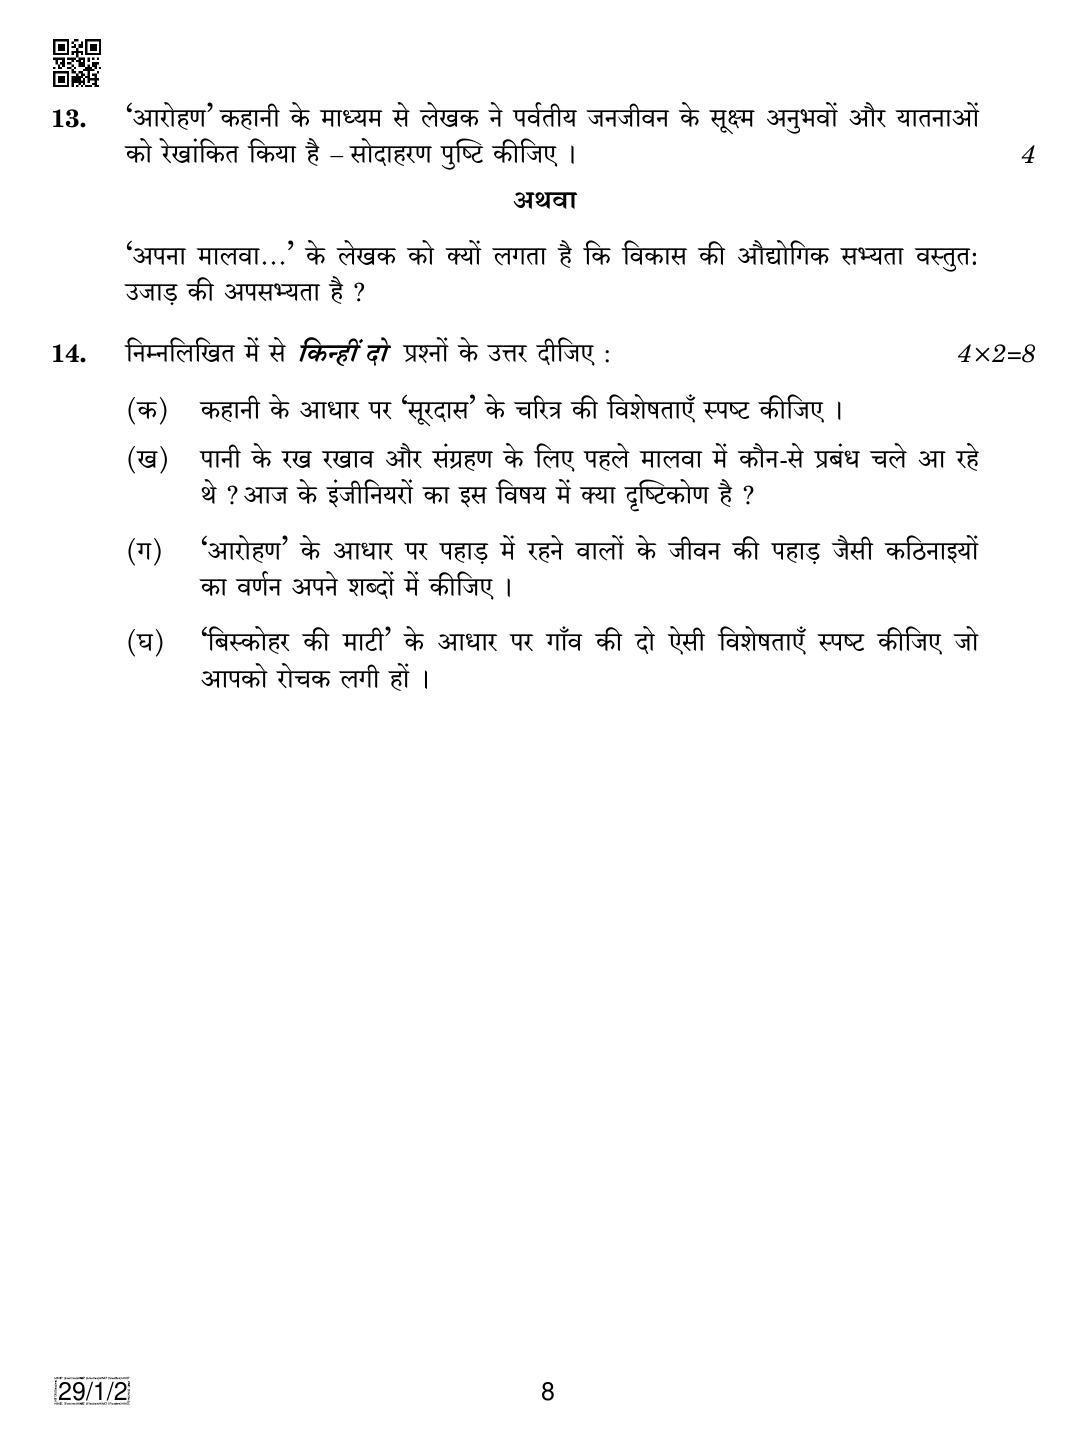 CBSE Class 12 29-1-2 HINDI ELECTIVE 2019 Compartment Question Paper - Page 8